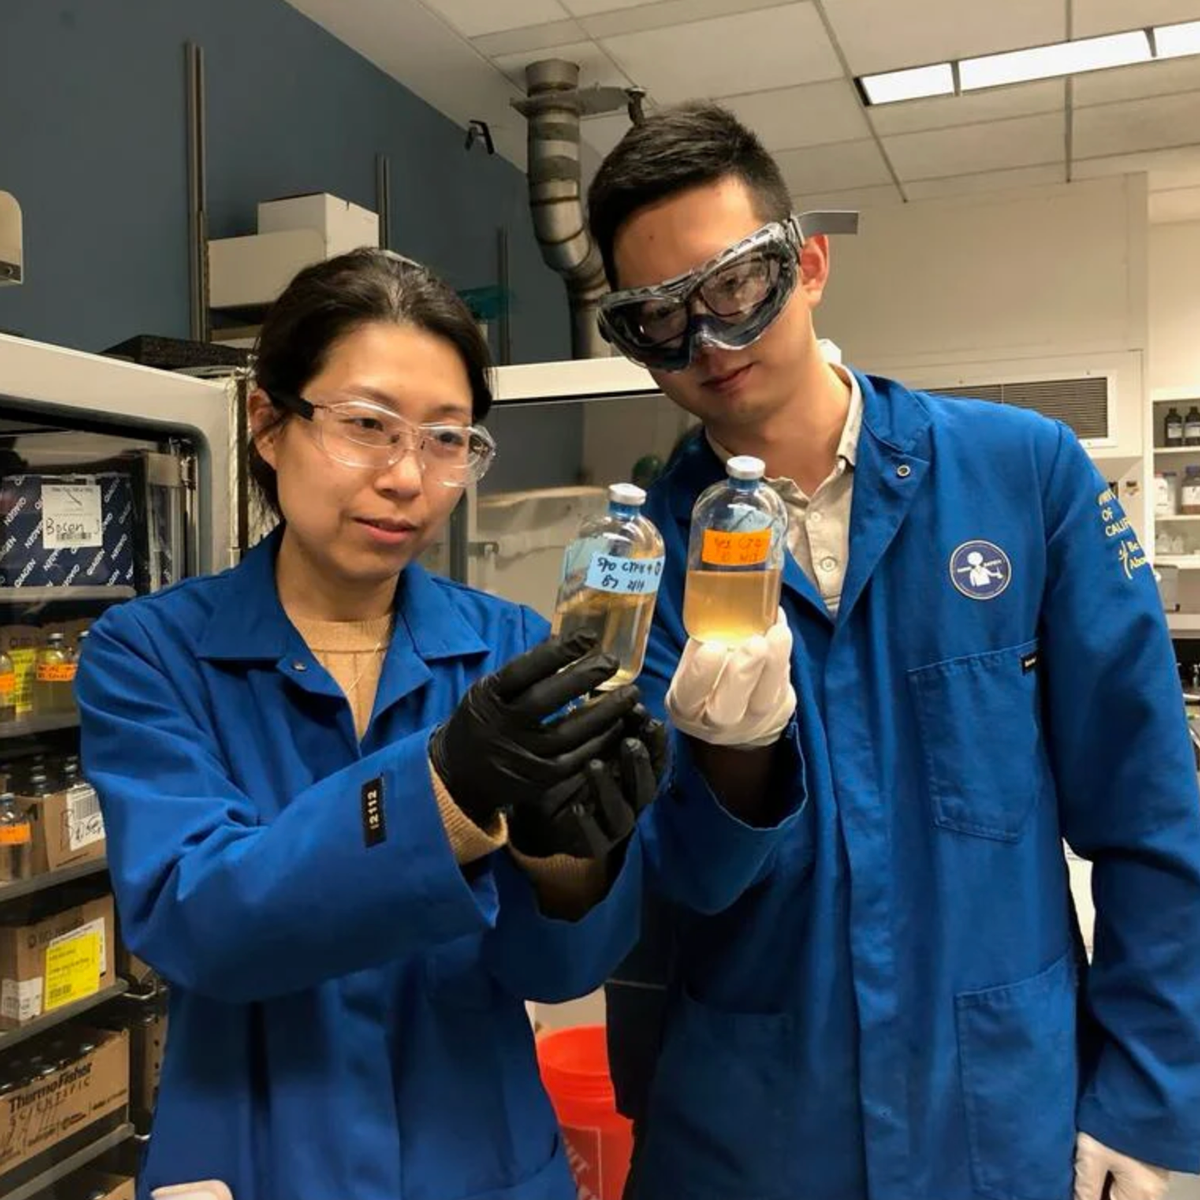 Yujie Men from UCR’s Department of Chemical and Environmental Engineering develops methods to clean up contamination from forever chemicals